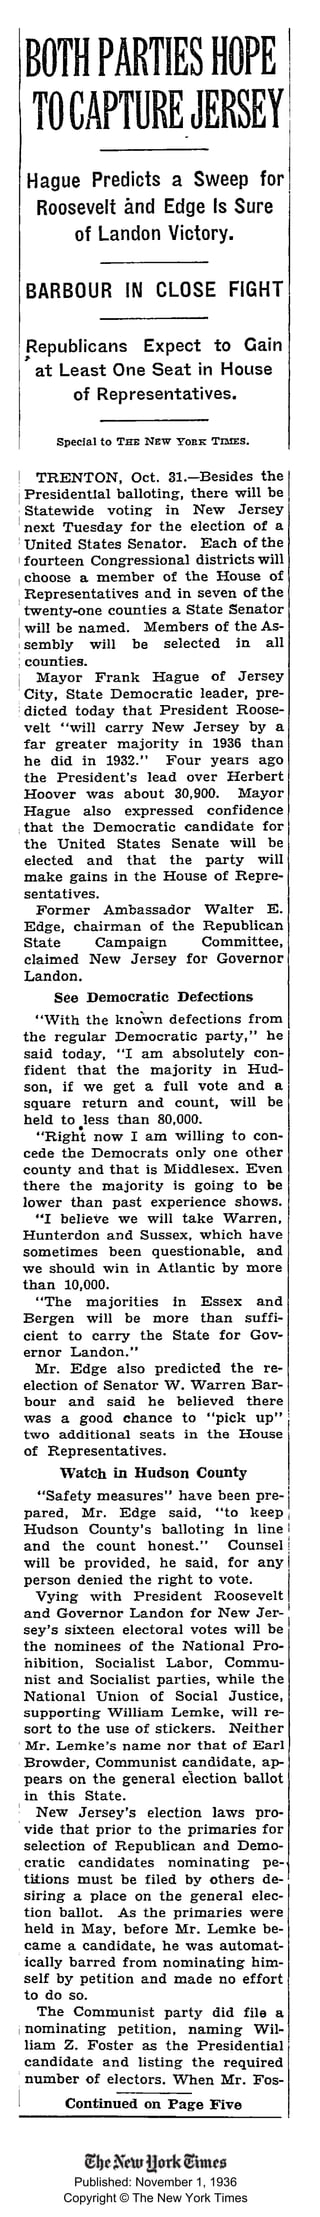 Published: November 1, 1936
Copyright © The New York Times
 